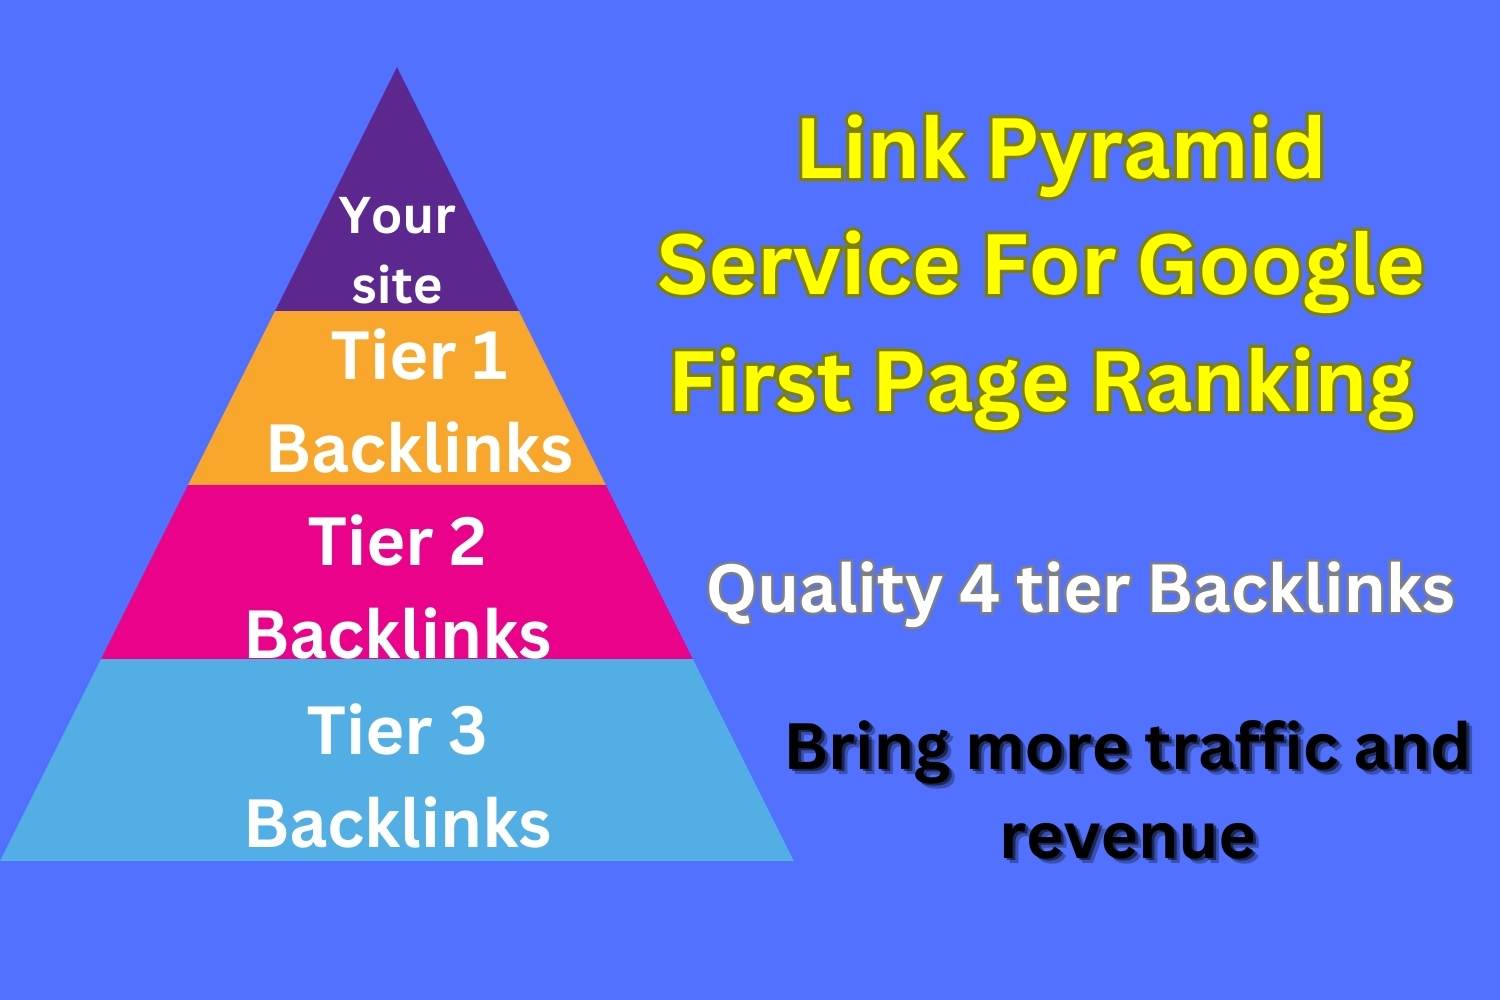 High-Quality 4-Tier Link Pyramid Service to Boost Your Site to the Top Rank on Google’s First Page